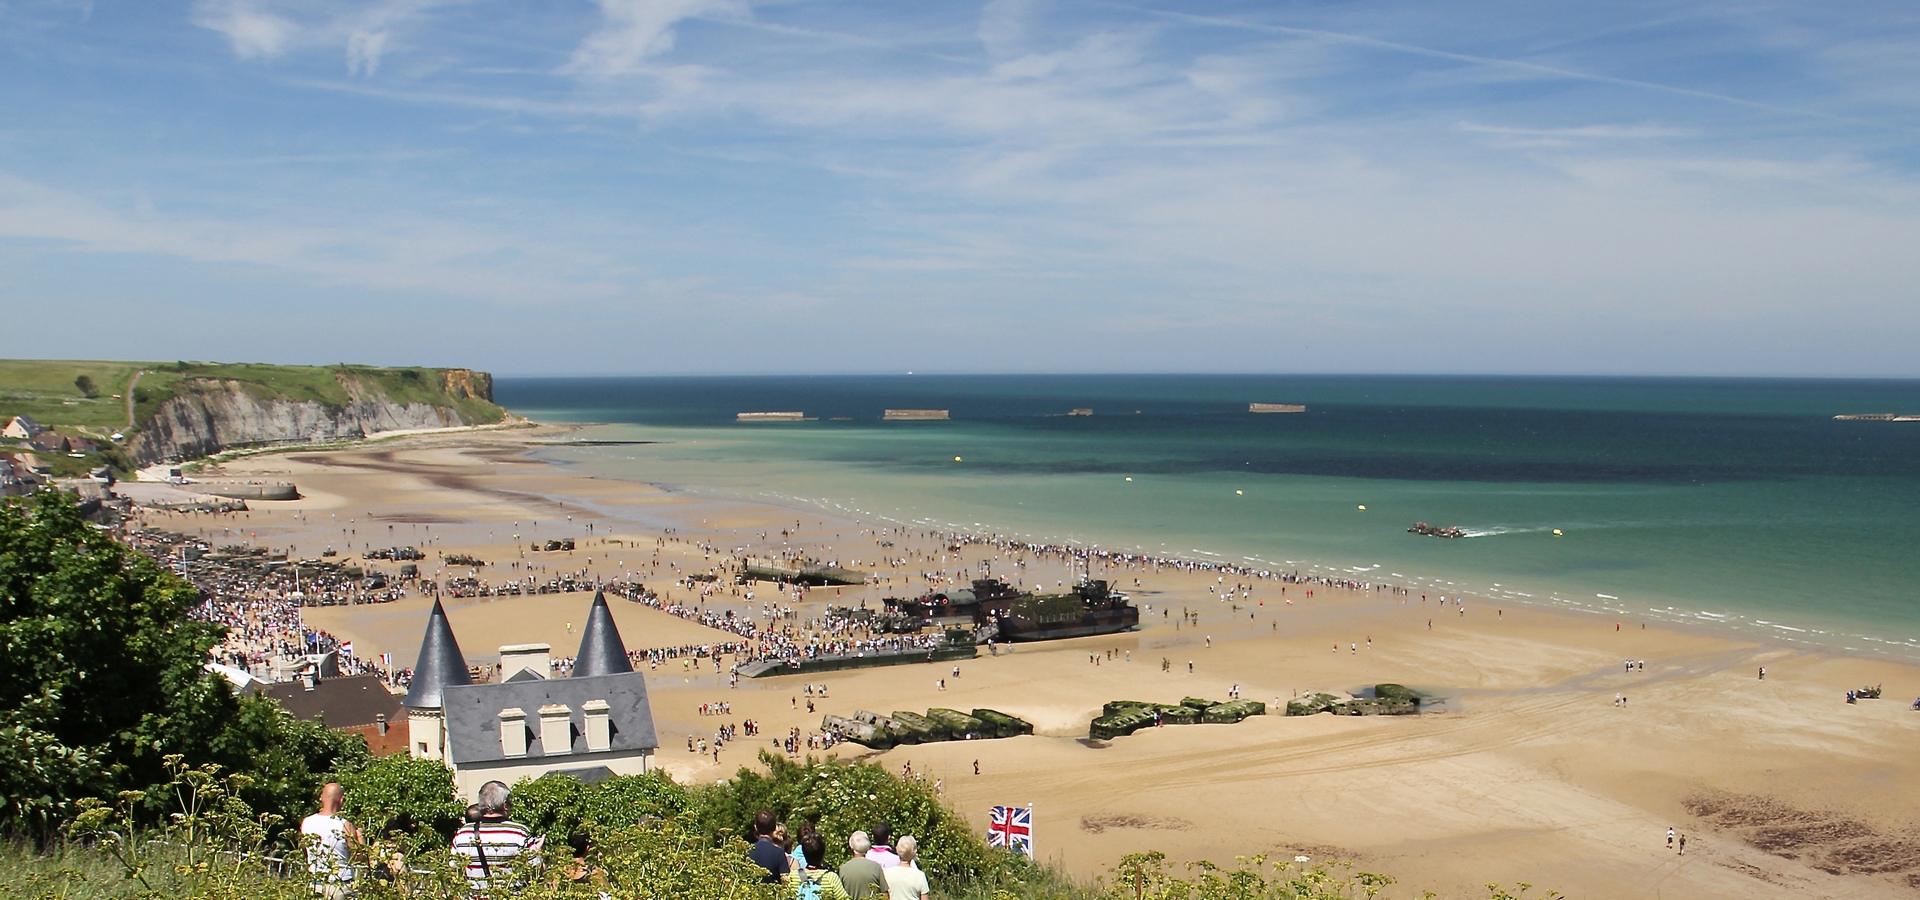 Historic sites Battle of Normandy